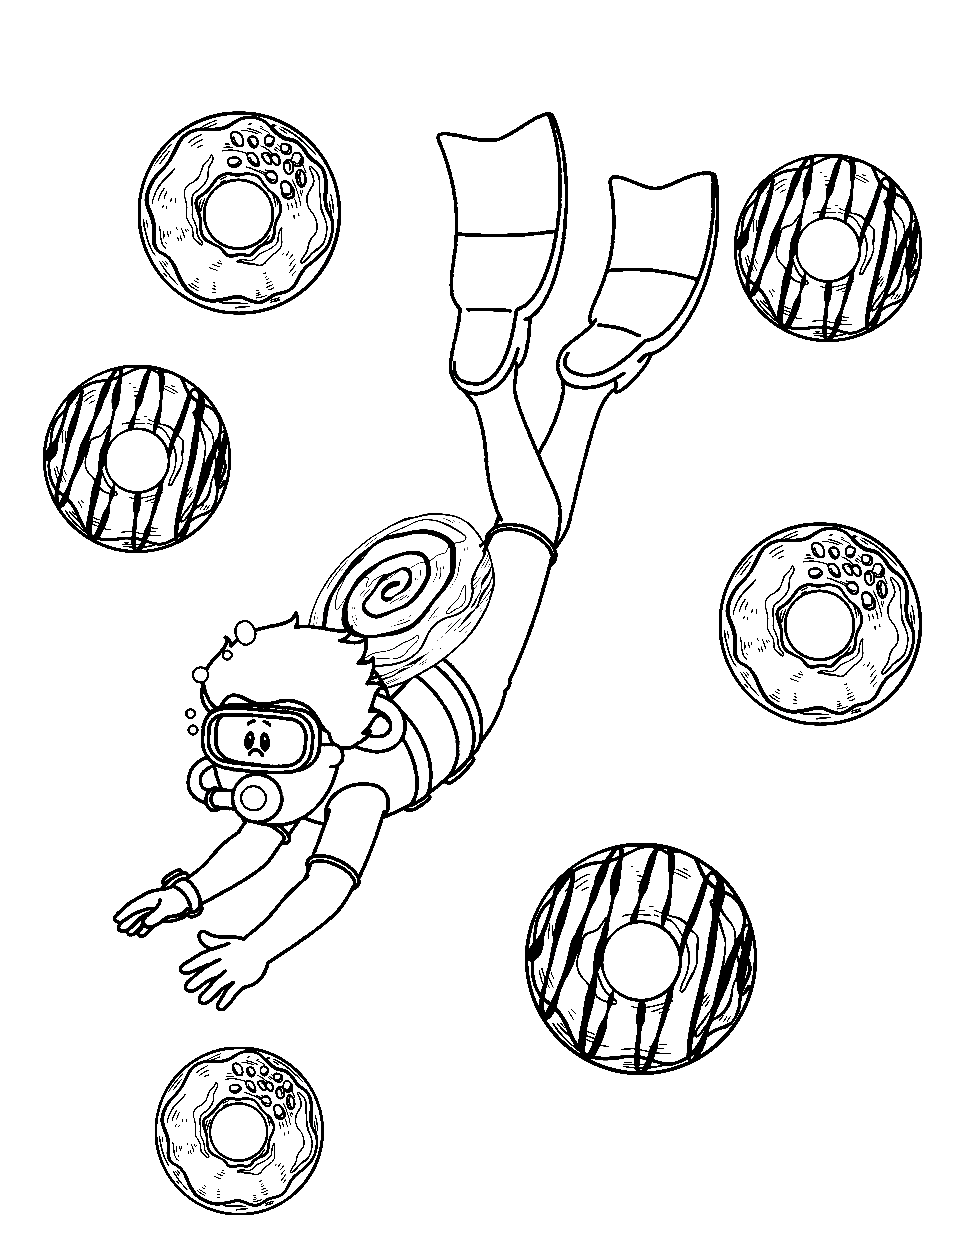 Donut Diver Coloring Page - Diver exploring the Donutverse with a donut powered suit.